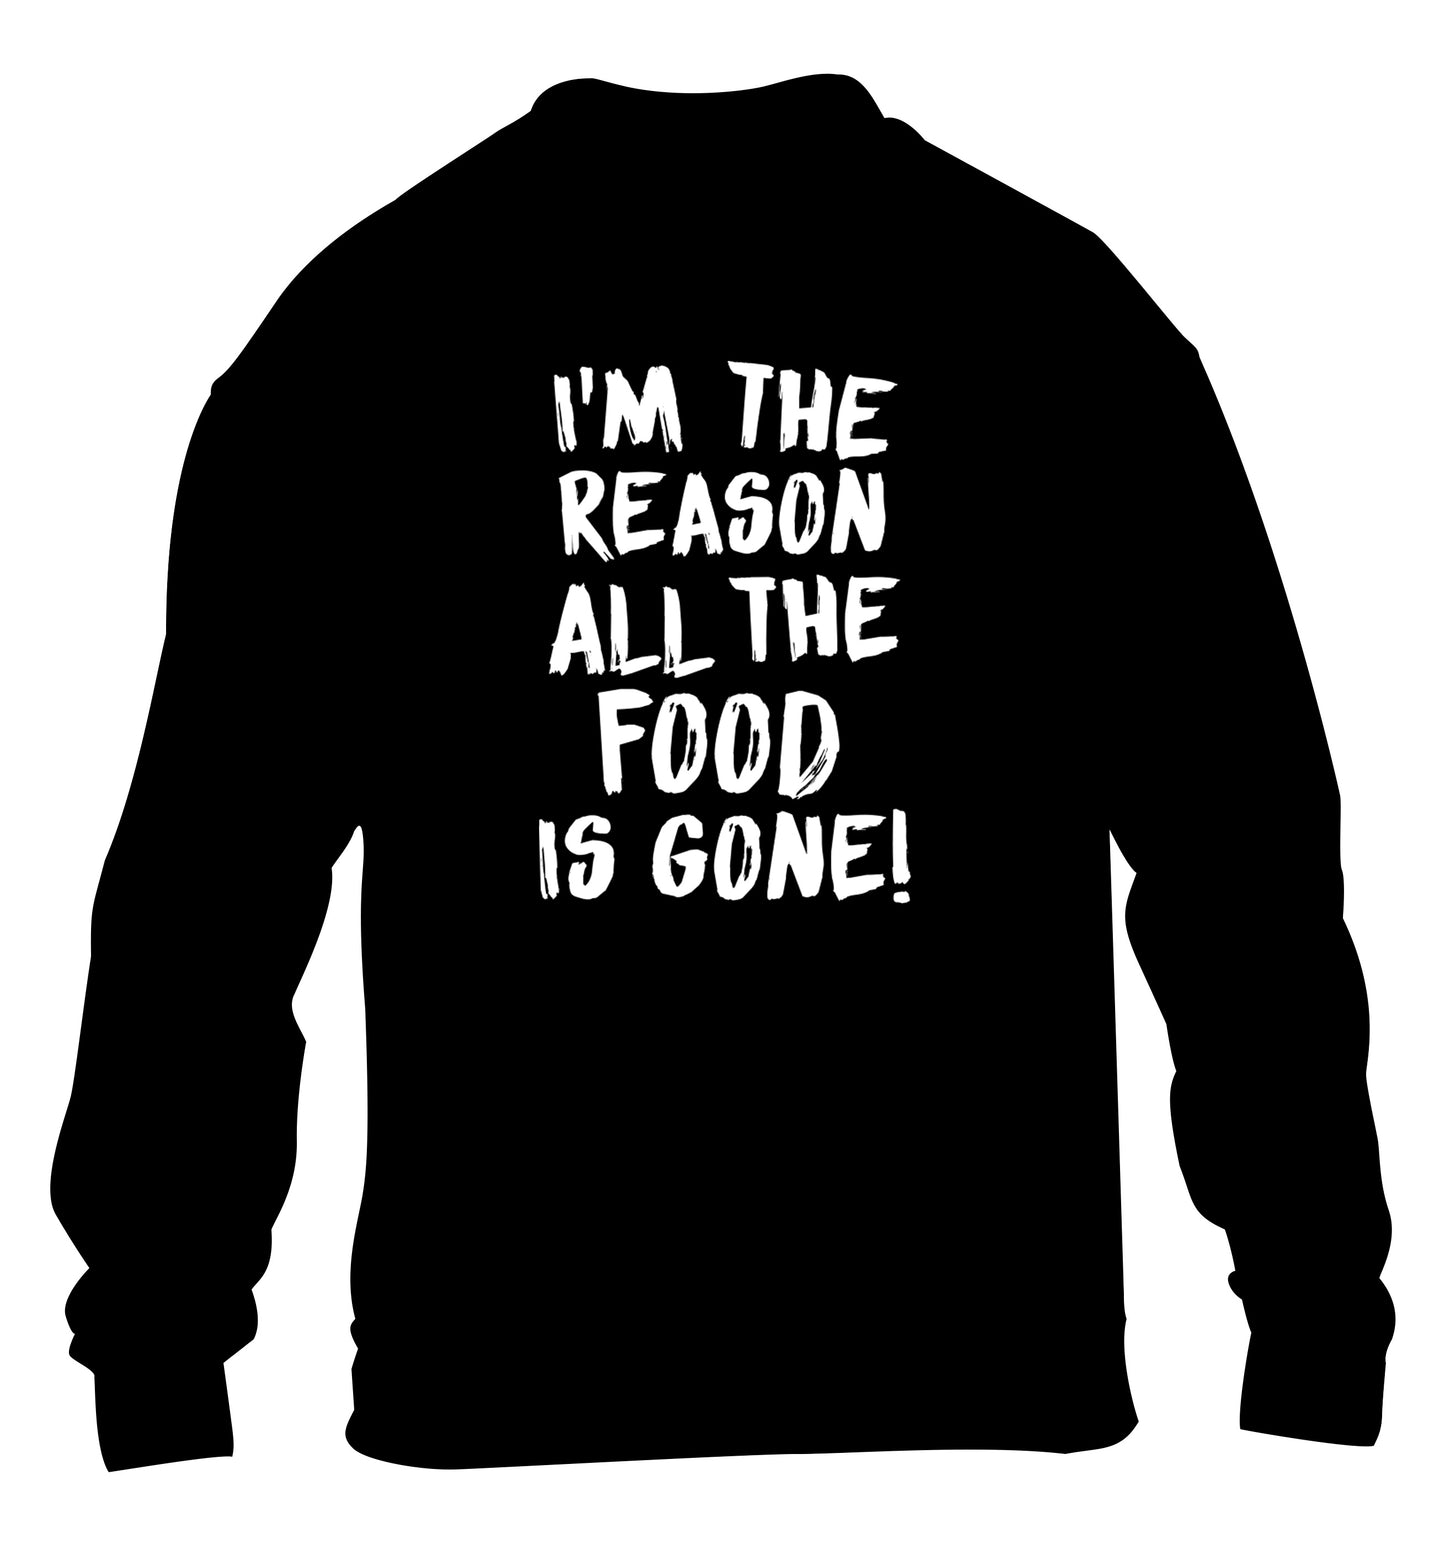 I'm the reason why all the food is gone children's black sweater 12-13 Years